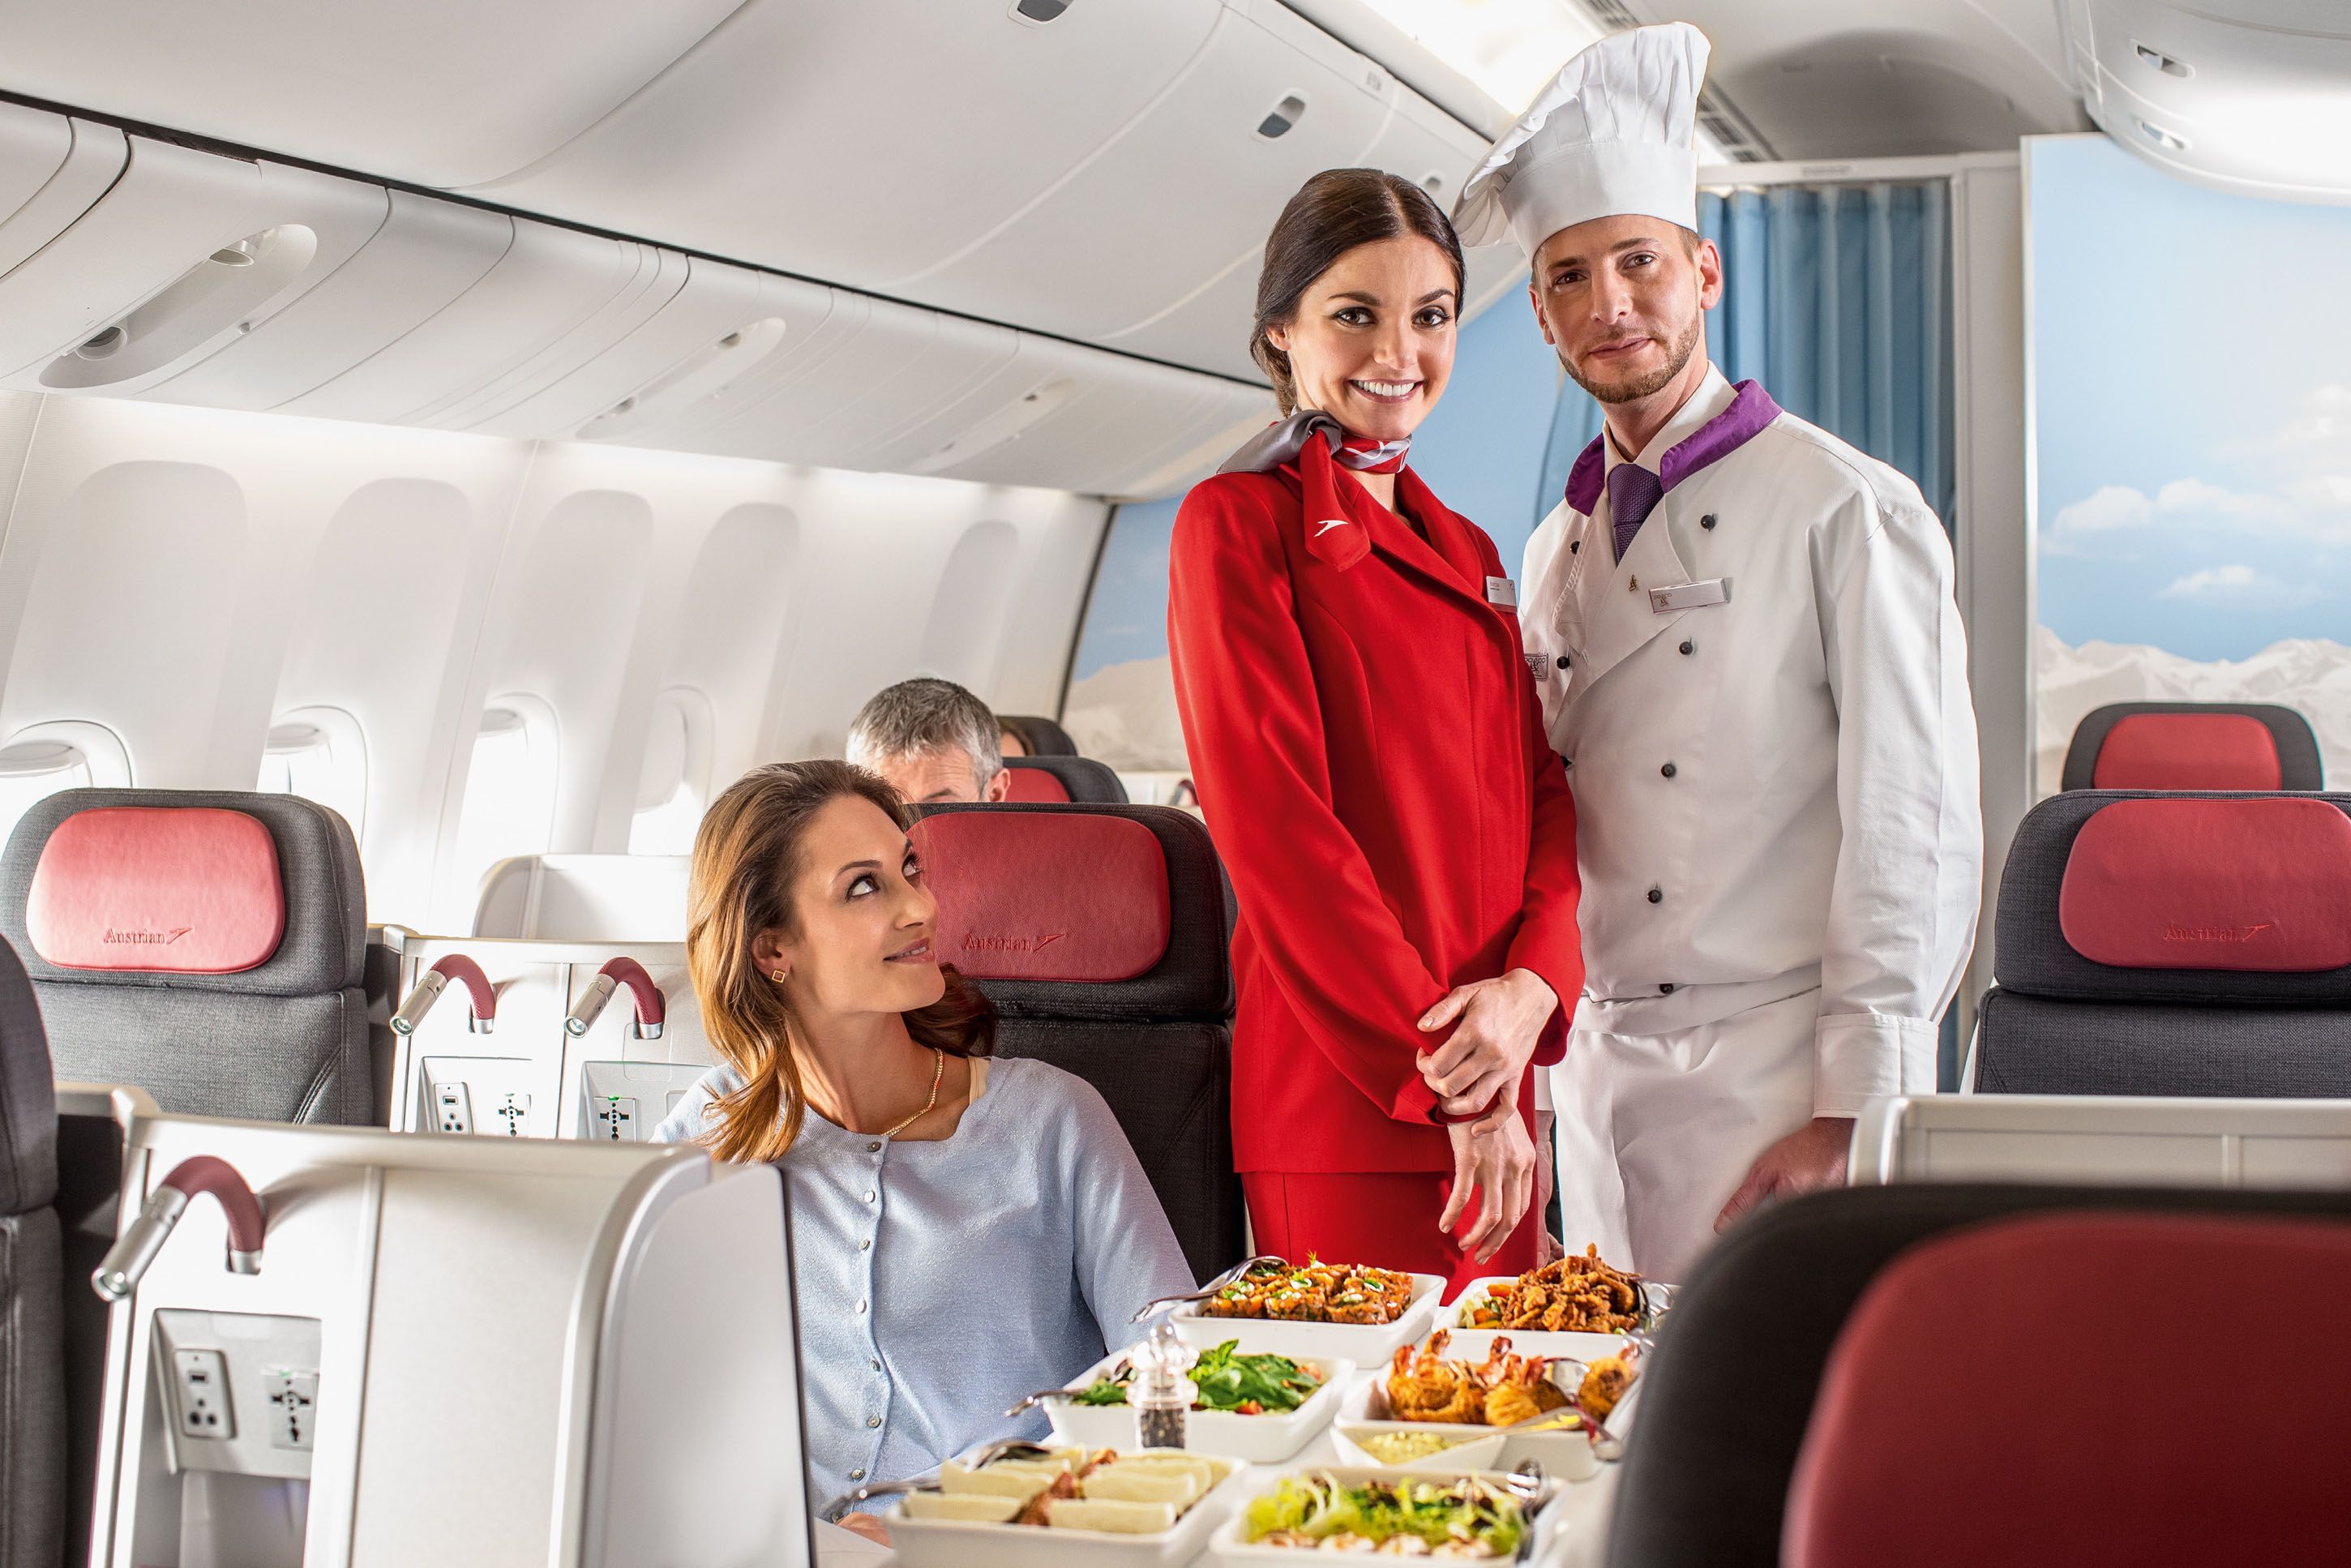 An Austrian Airlines flight attnedant standing next to the onboard chef.